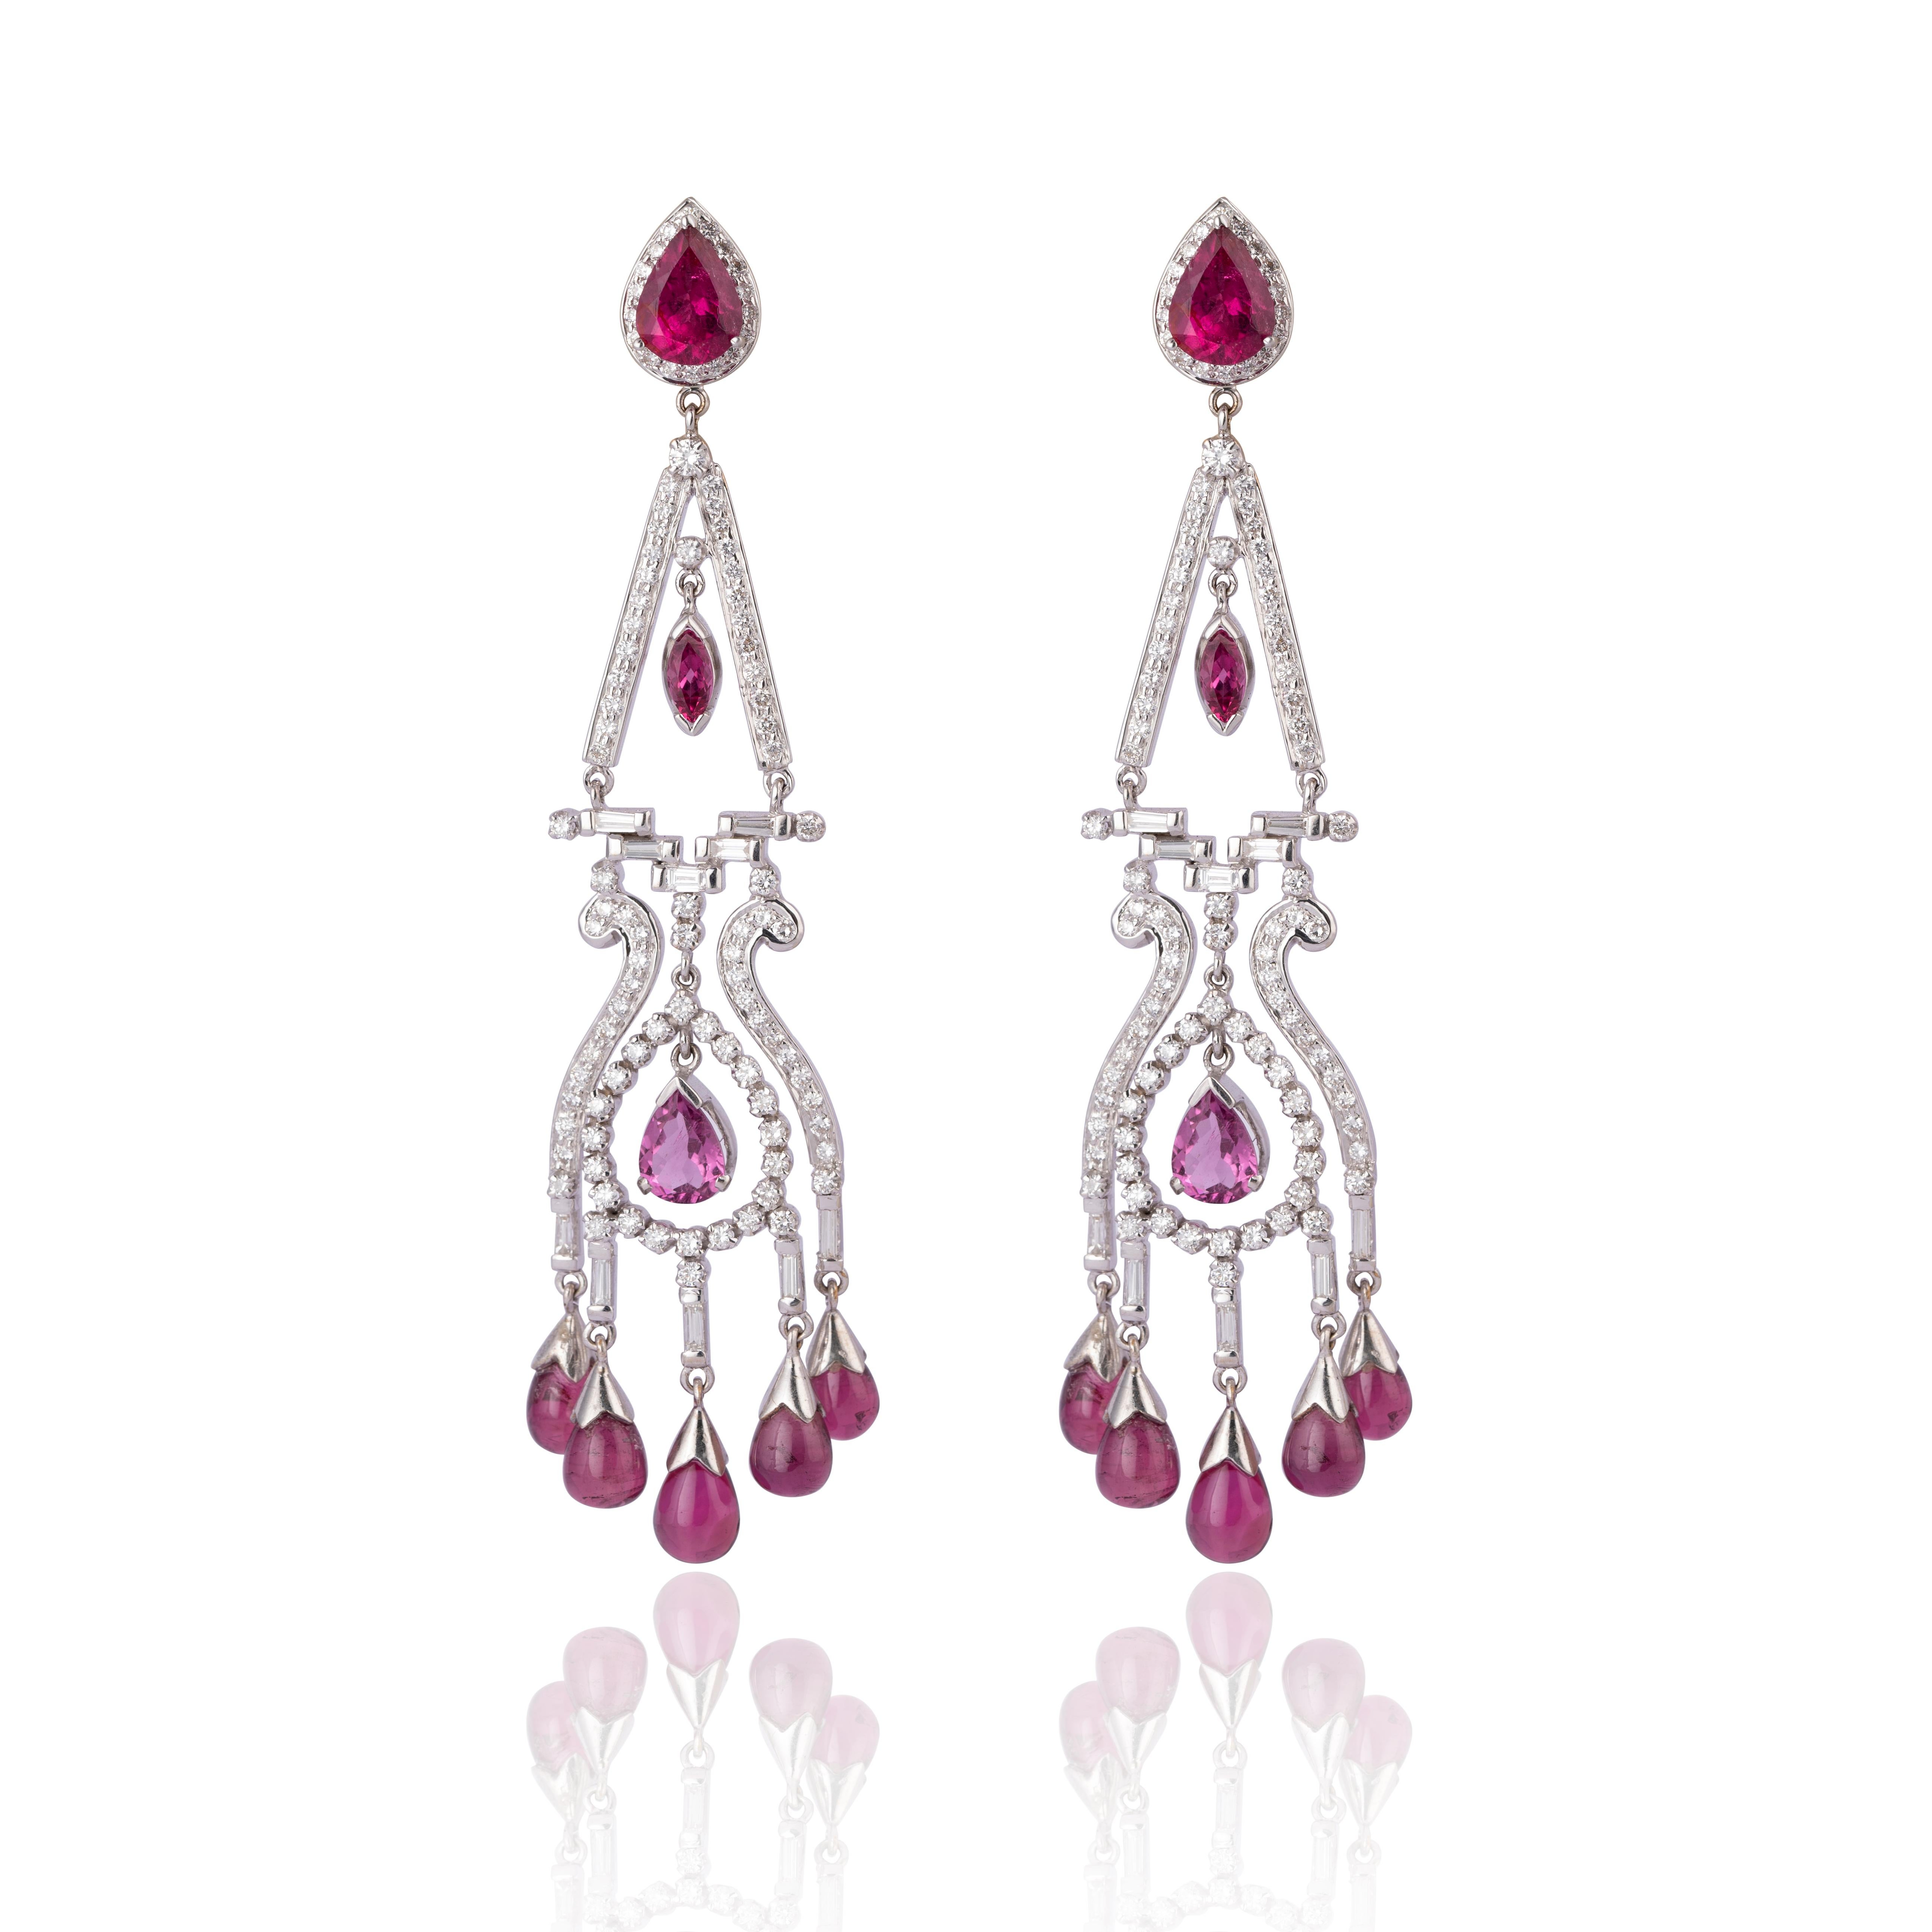 (Diamond 2.69 cts,) and (ruby light 21.58 cts ),(gold earring 18k nw 30.024gm)